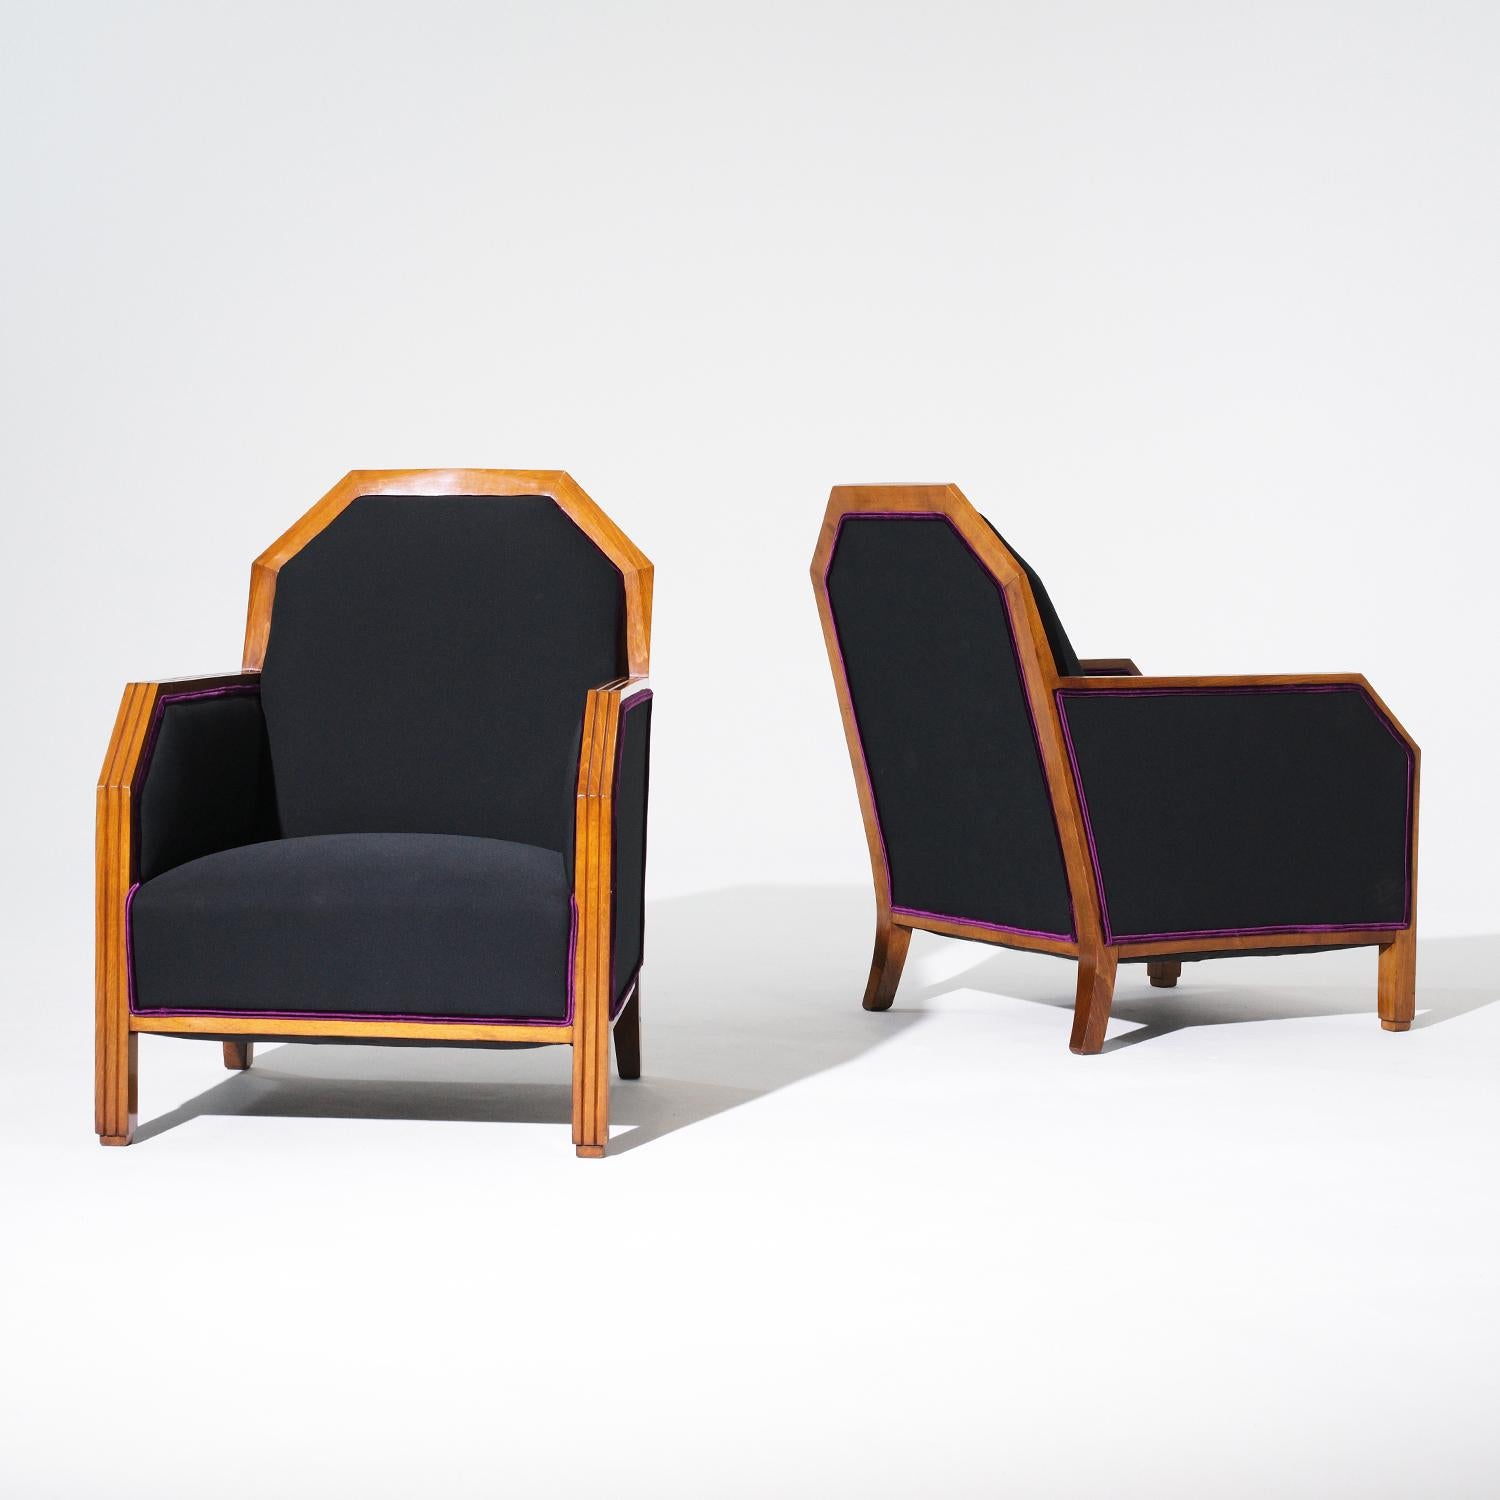 A vintage French pair of stunning Art Deco club chairs with black linen upholstery. The frame is made of hand crafted tinted Birchwood, in good condition. Minor stain on one of the chairs, due to age. Wear consistent with age and use. Circa 1930,